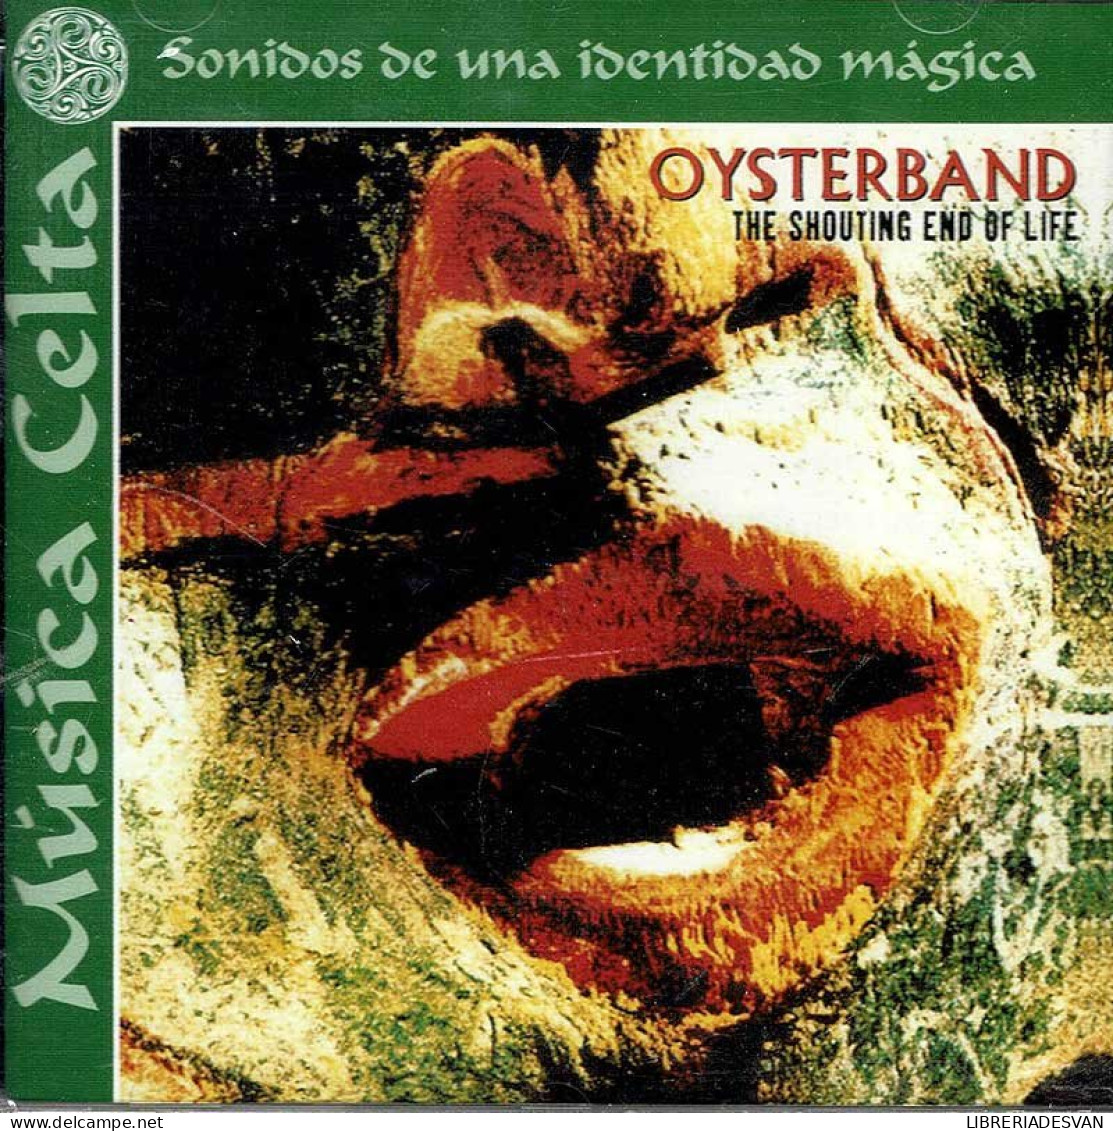 Oysterband - The Shouting End Of Life. CD - Country & Folk